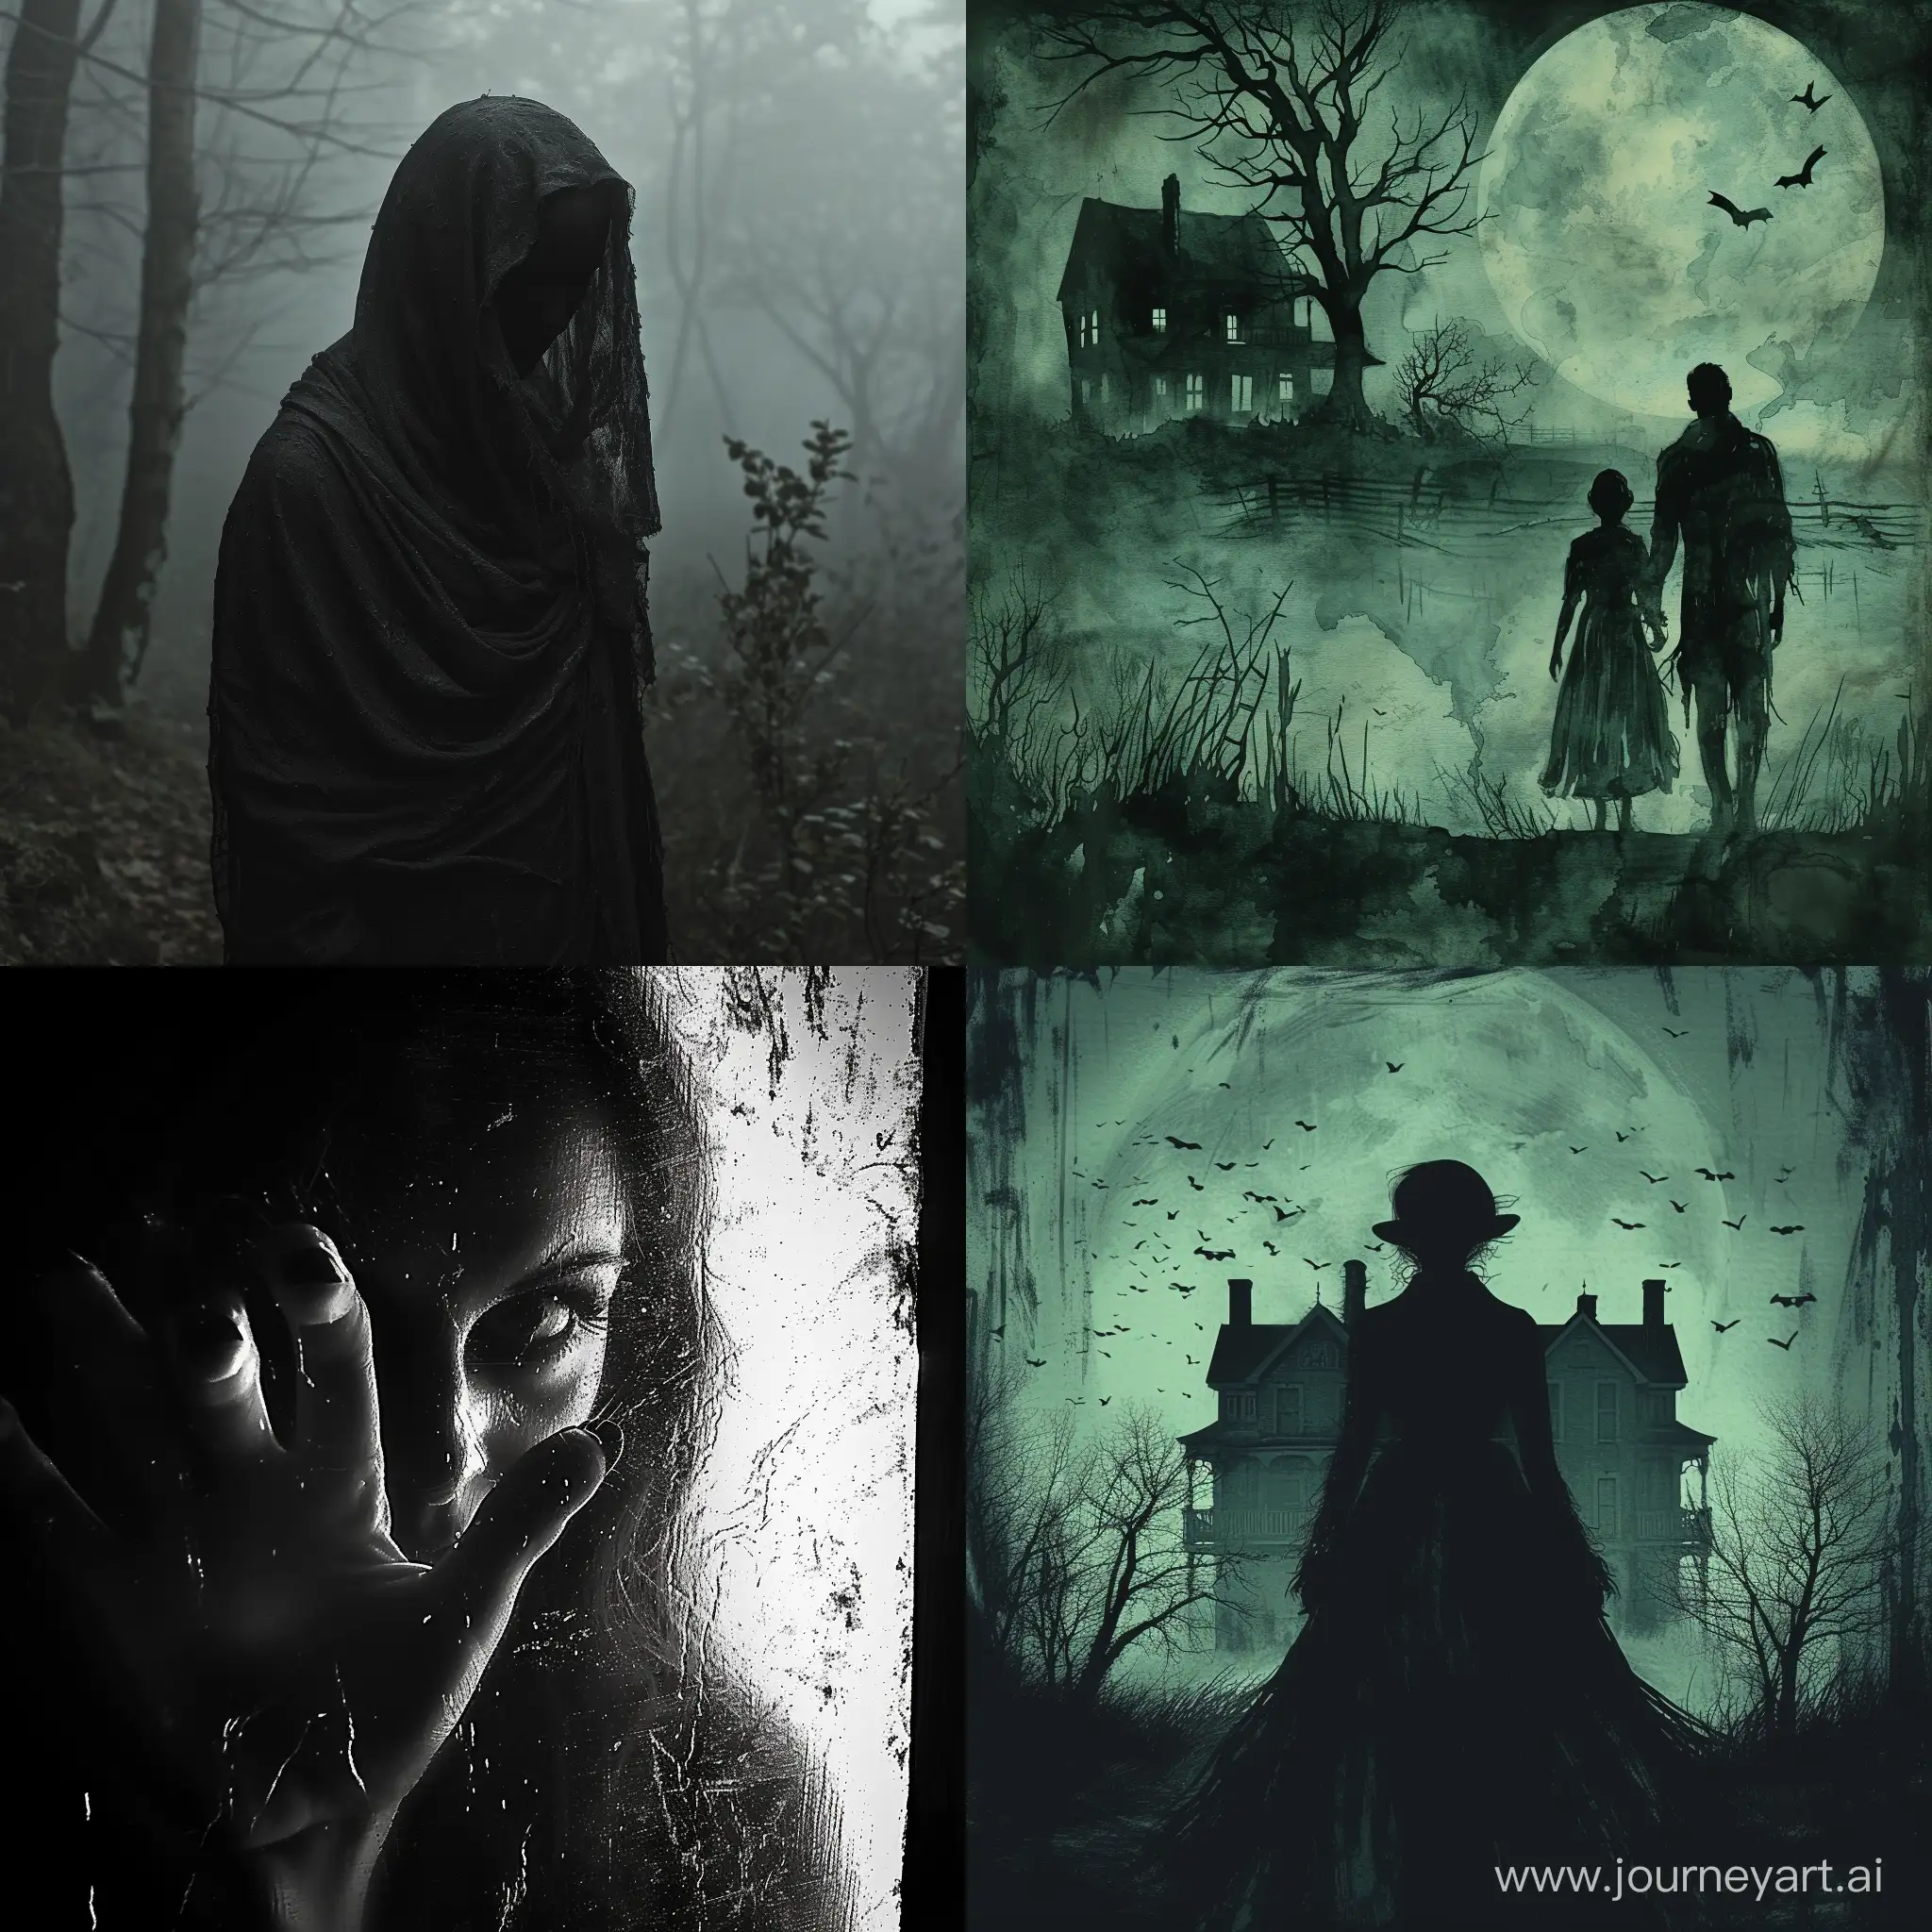 Horror theme profile picture about storytelling